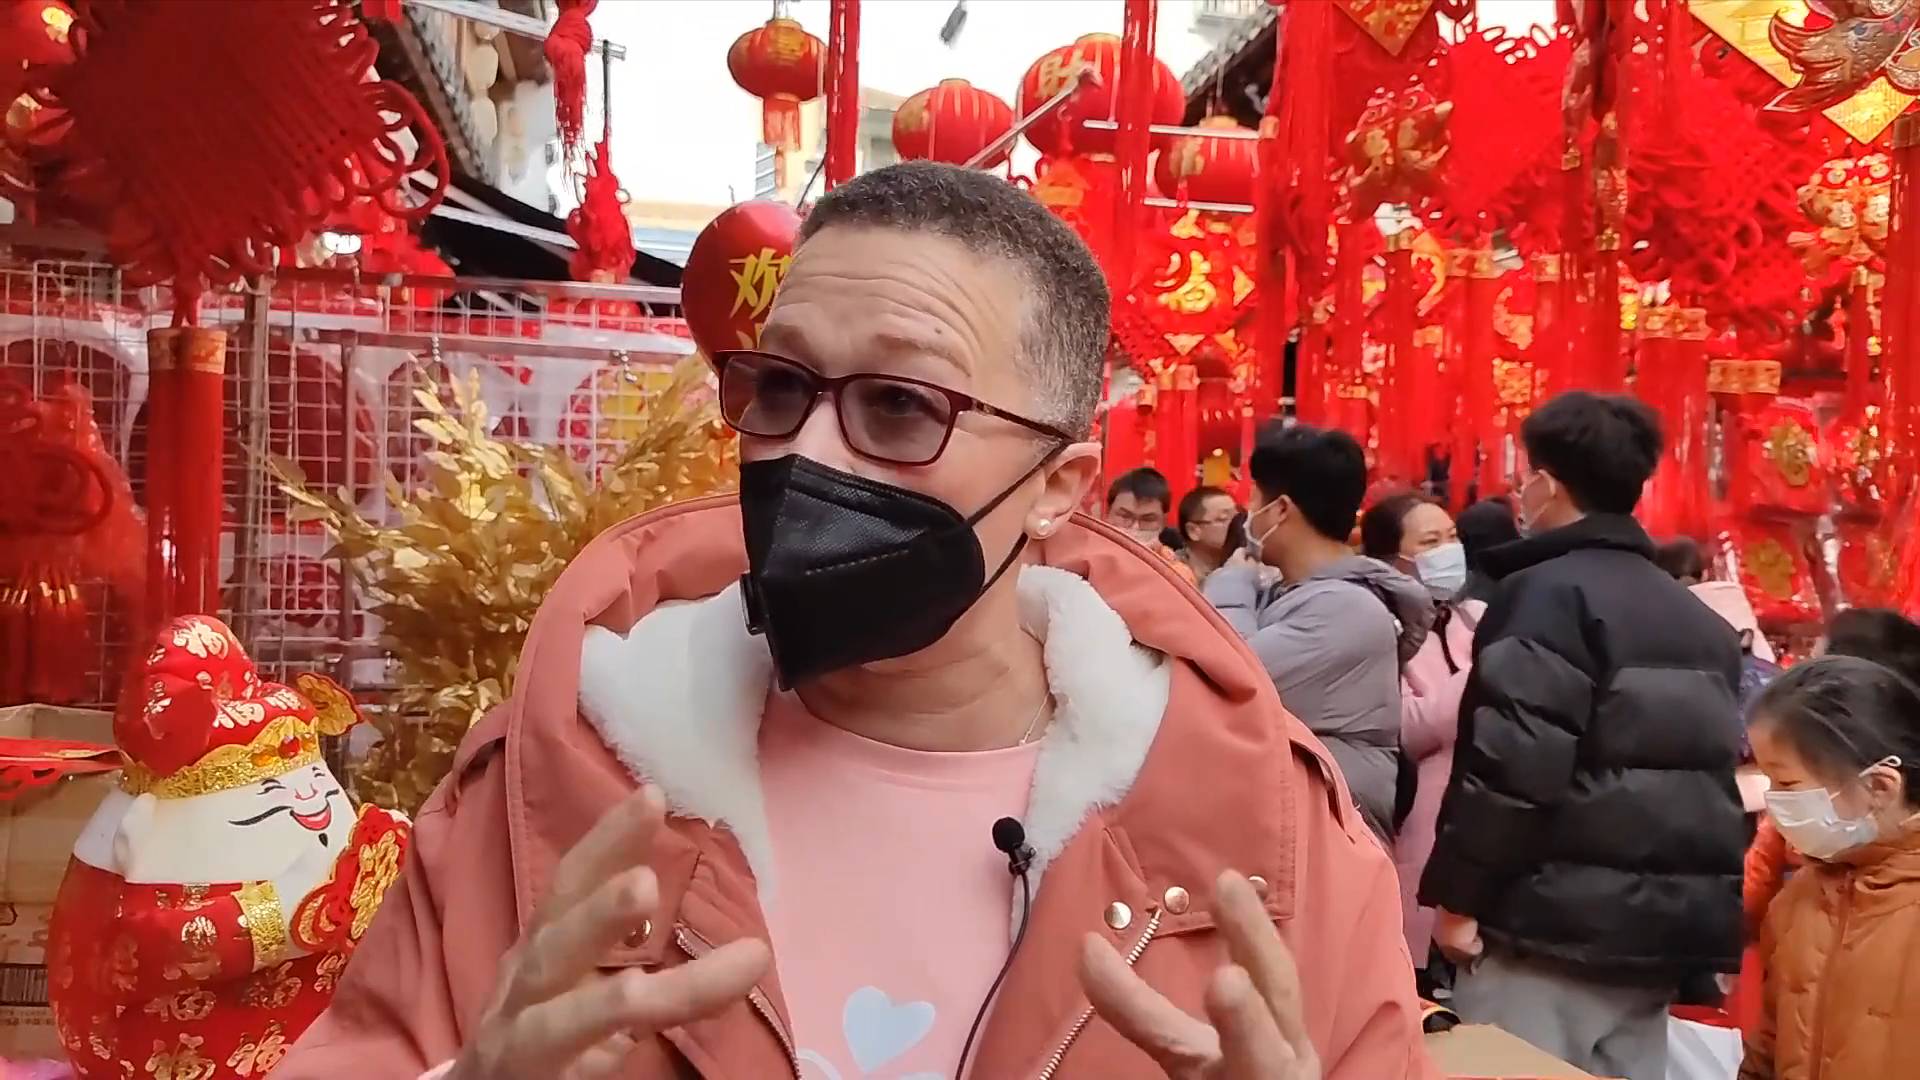 GLOBALink | Lunar New Year's shopping with a South African in Anhui, China